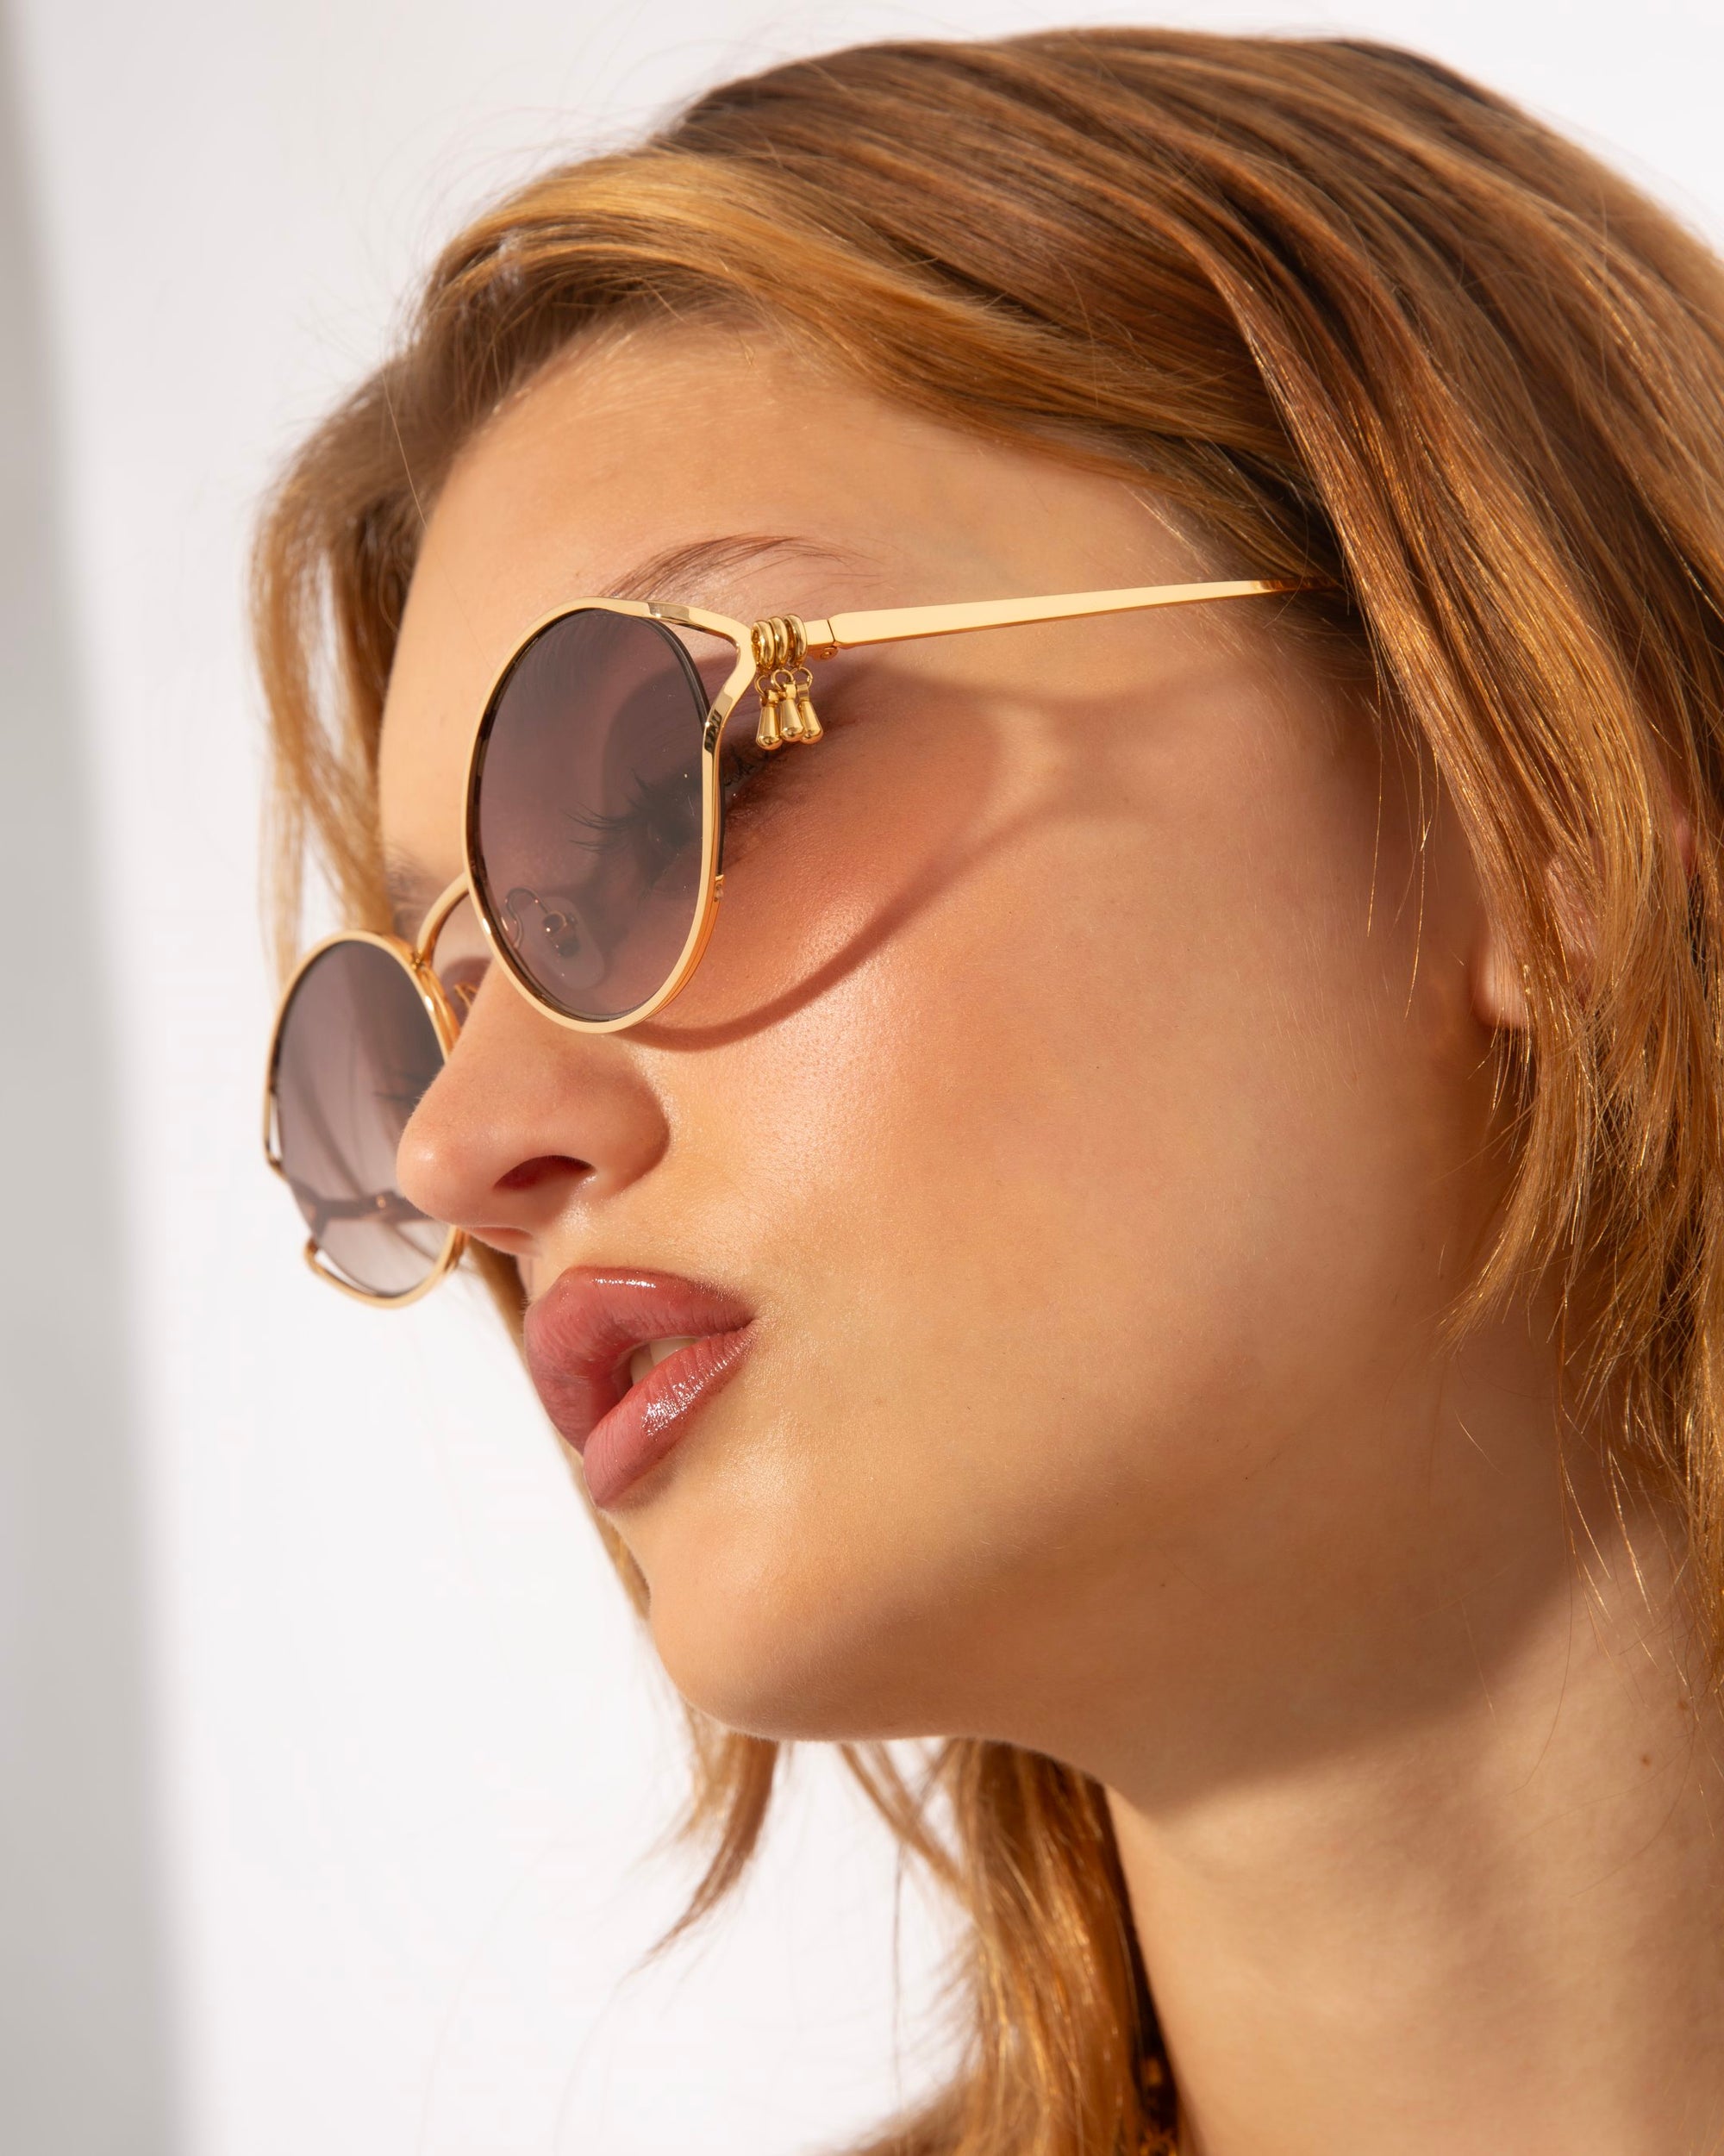 A person with light brown hair wearing round, 18-karat gold-framed Sky sunglasses by For Art&#39;s Sake® looks off to the side. The background is bright and minimalist, highlighting the person&#39;s face and stylish eyewear.